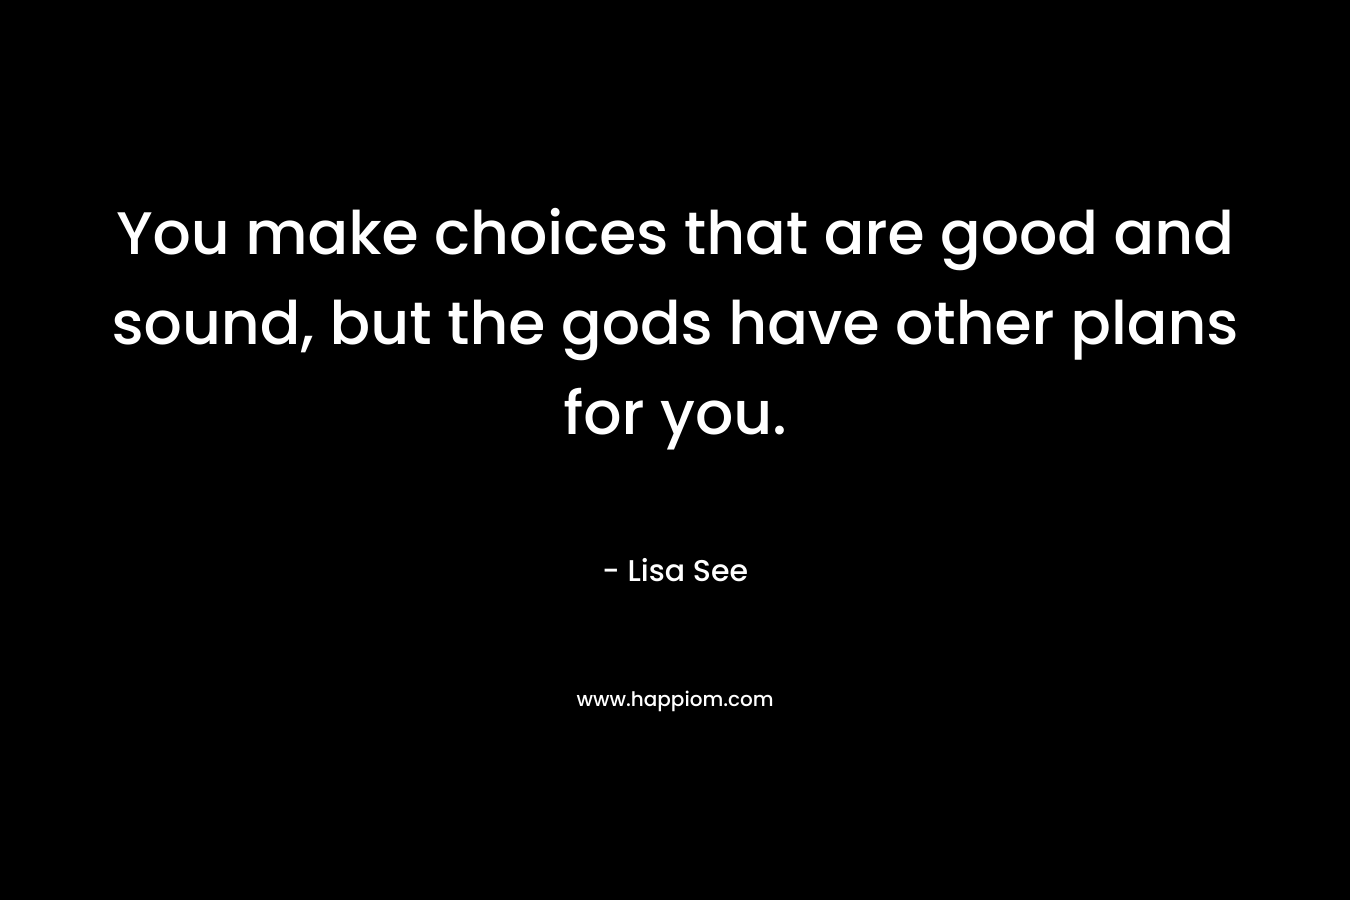 You make choices that are good and sound, but the gods have other plans for you. – Lisa See